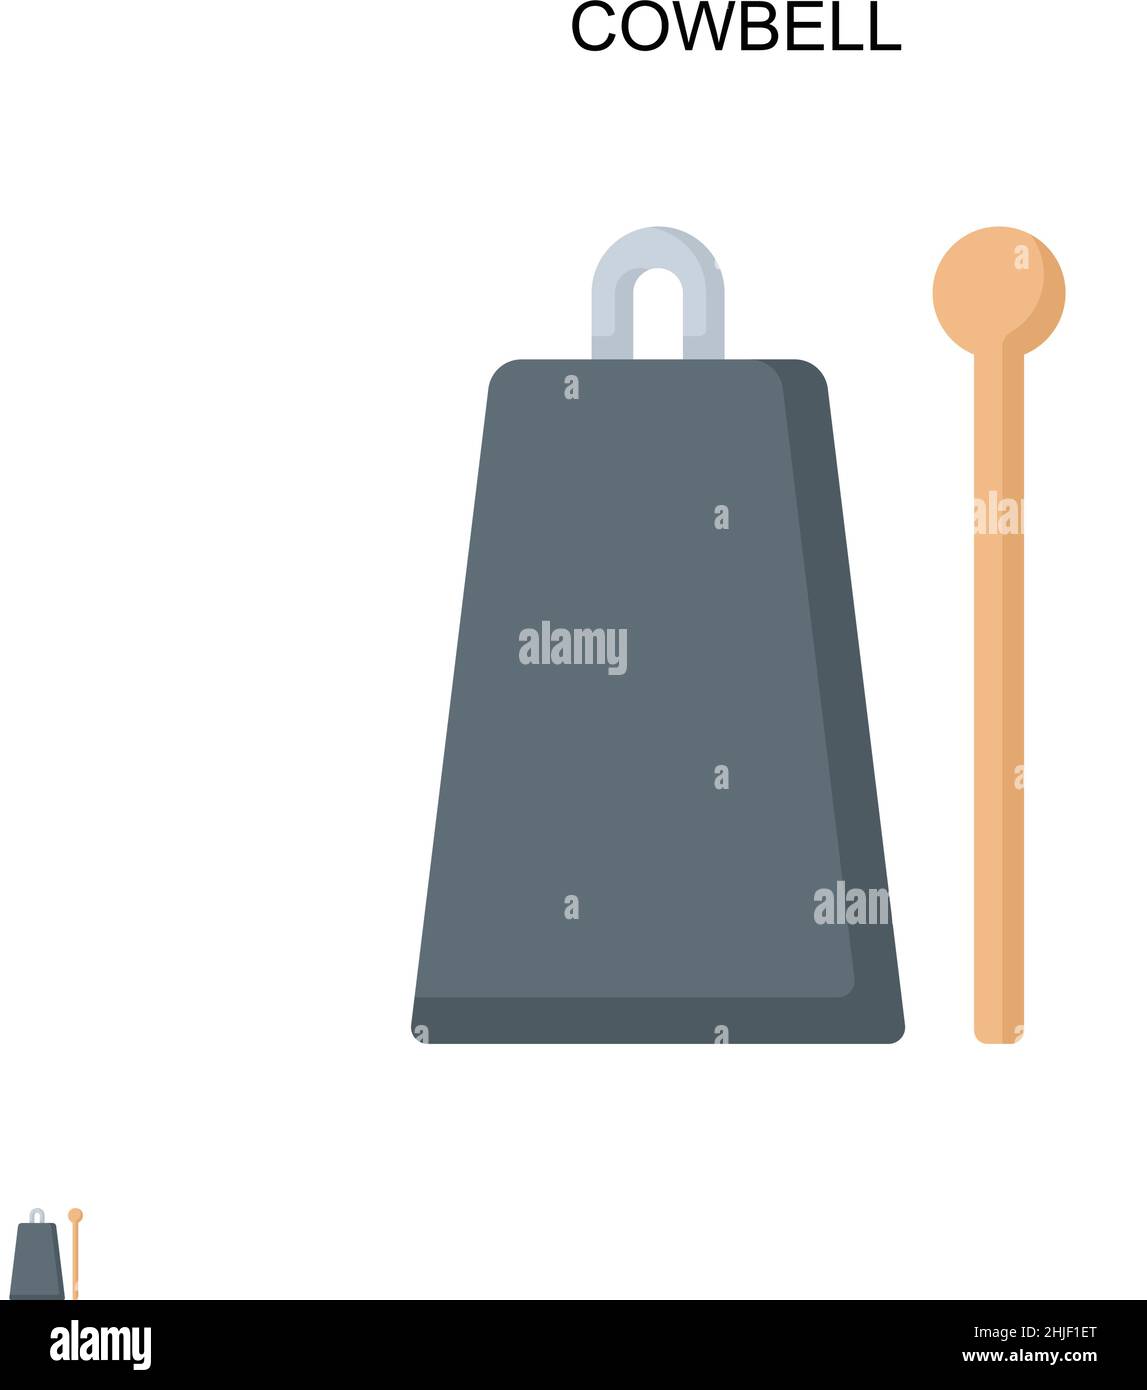 Cowbell Icon Simple Linear Style Cow Bell With Stick Symbol Stock  Illustration - Download Image Now - iStock